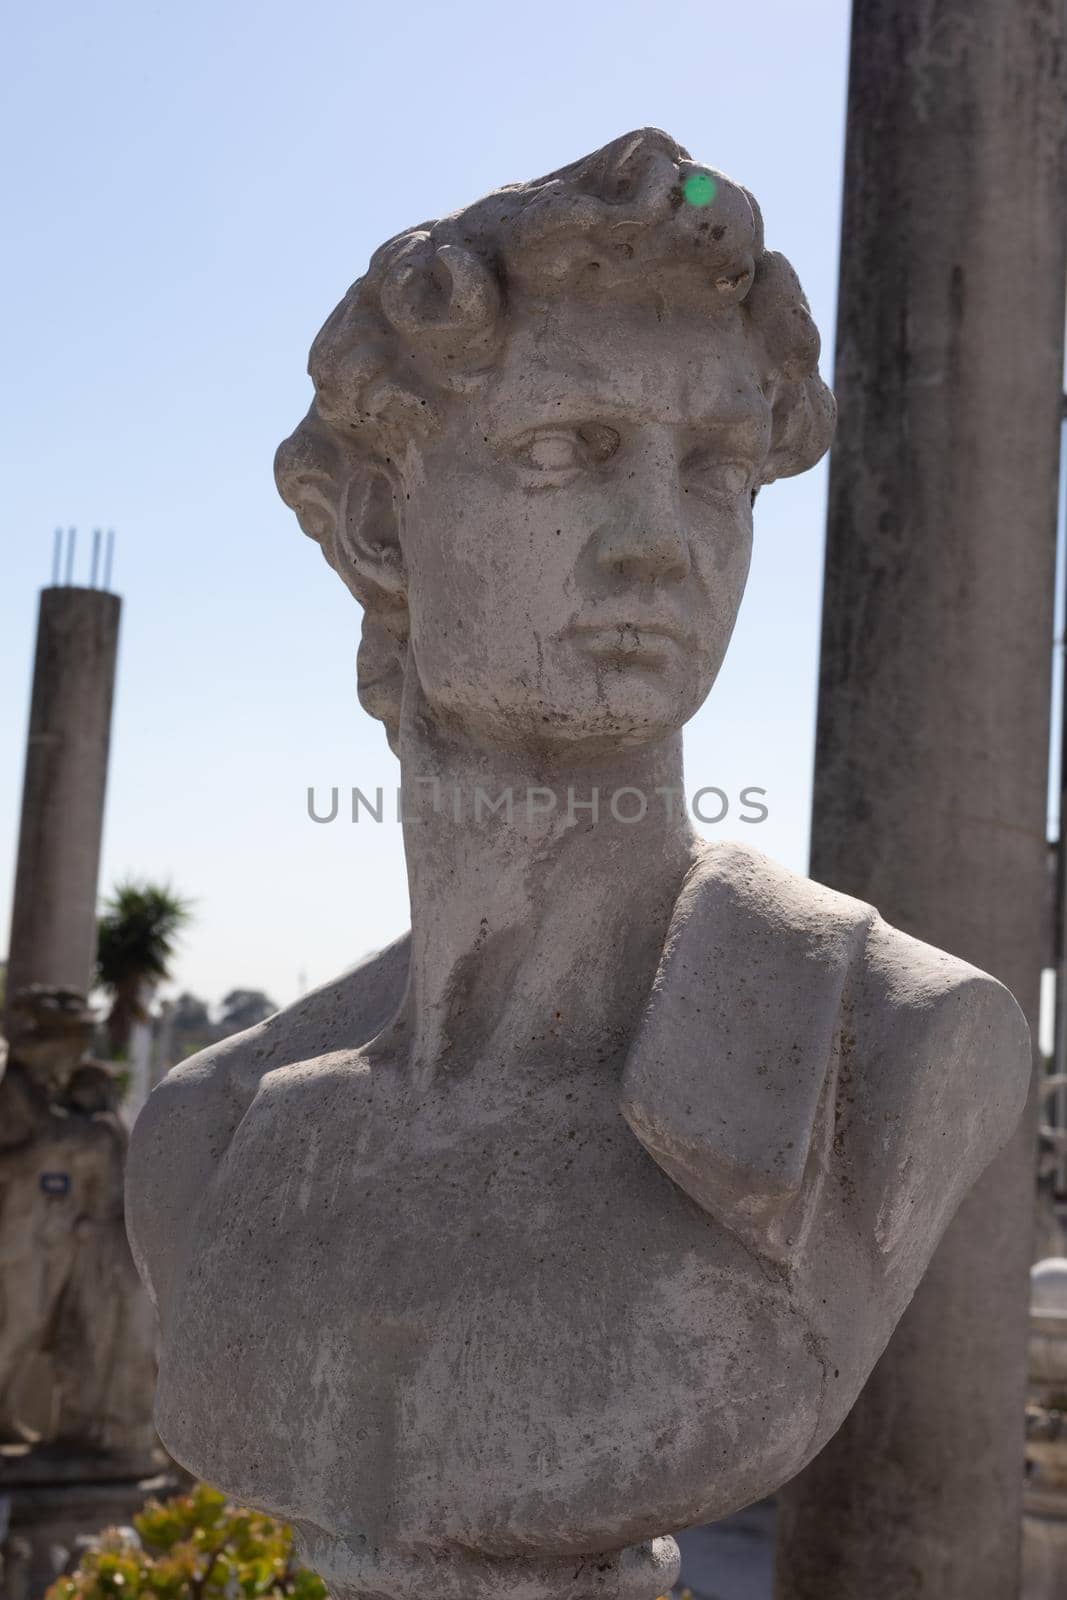 Ancient stone sculpture of man's bust in reclamation yard by Wavebreakmedia